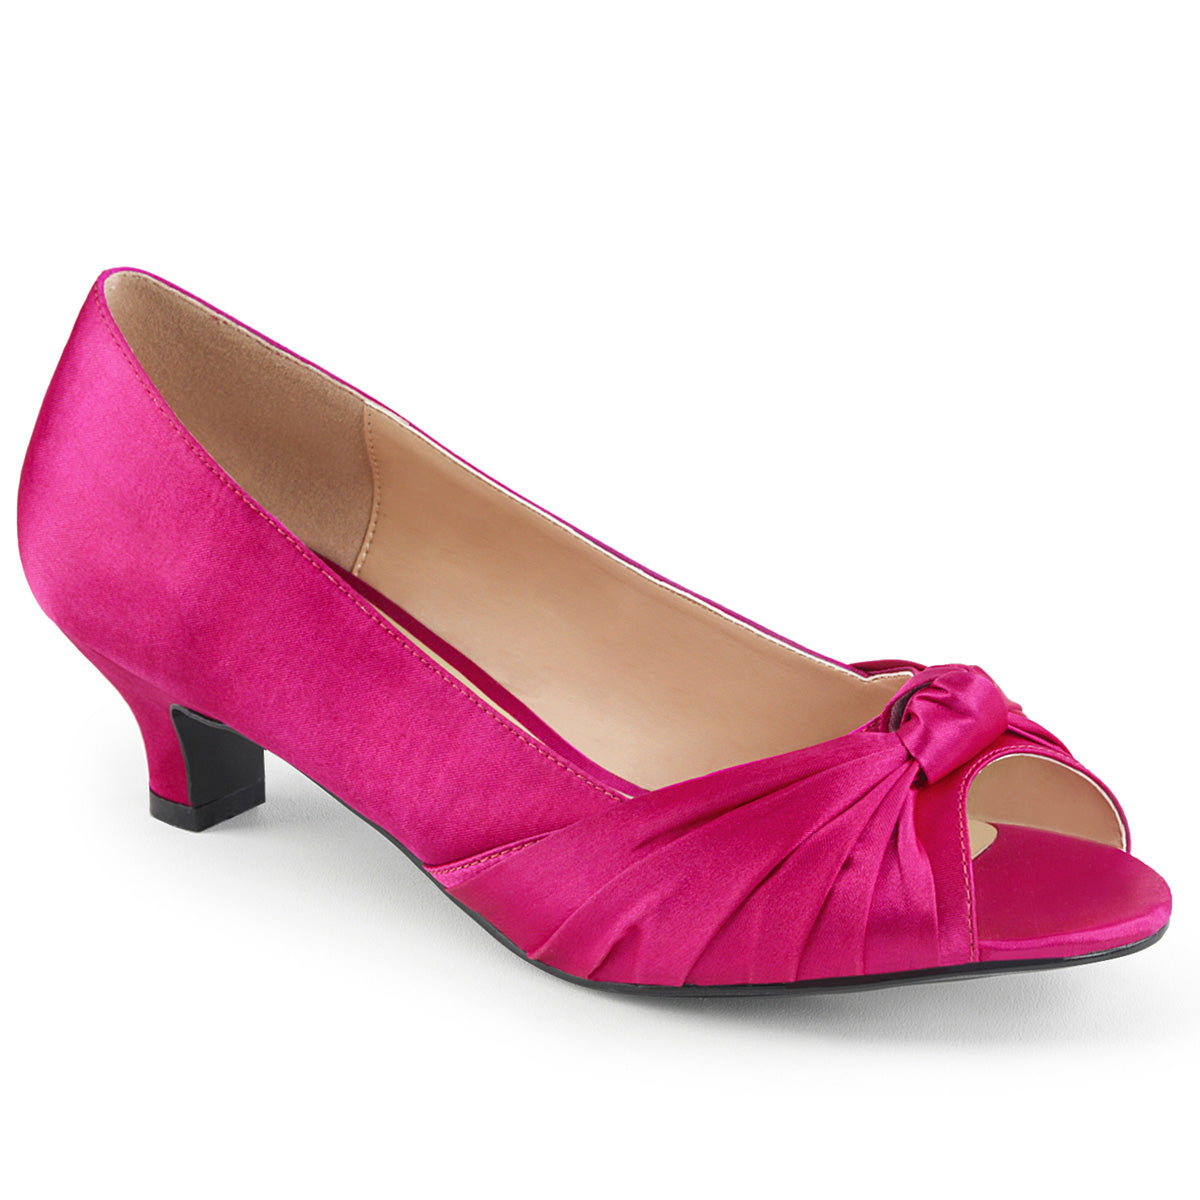 Pleaser Pink Label Womens Pumps FAB-422 H. Pink Satin